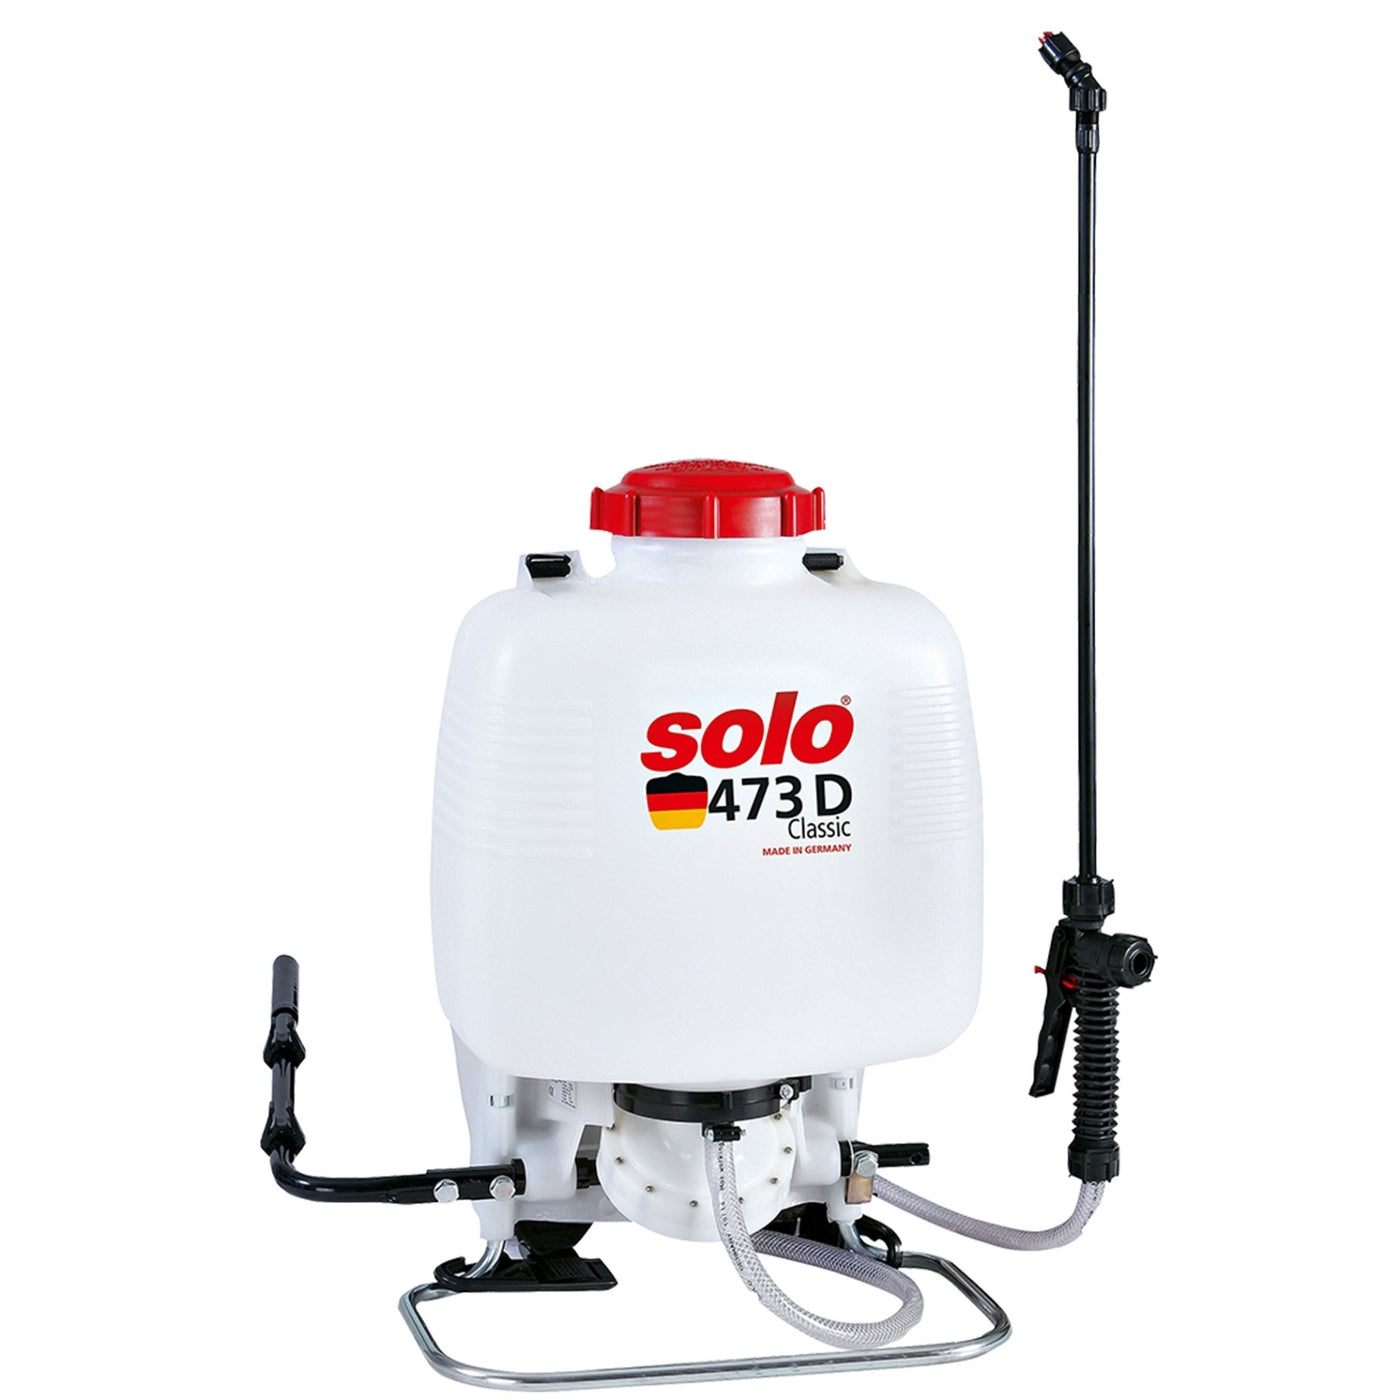 Solo Classic backpack sprayer 473D 10L diaphragm - Solo New Zealand